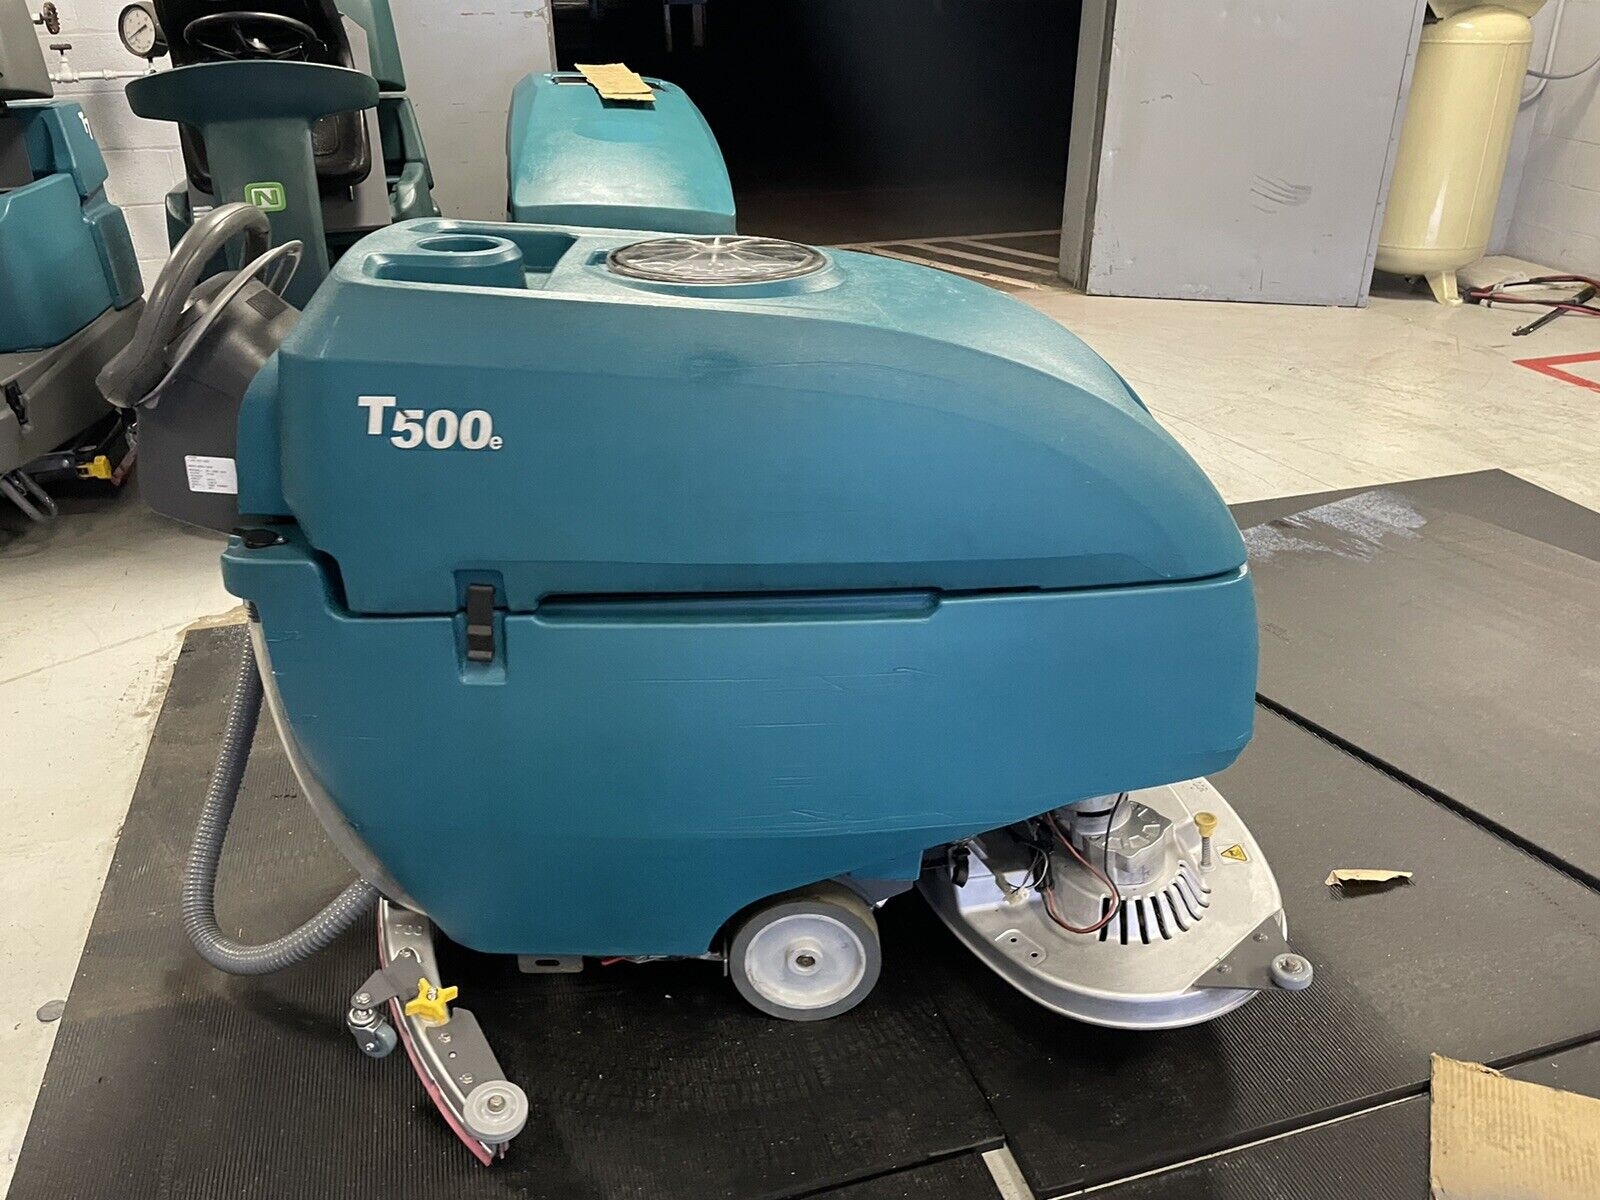 Deliver predictable results, extend machine life, and reduce cost of ownership with a suite of innovative technologies. The T500 / T500e Walk-Behind Floor Scrubbers provide optimal performance and consistent results on virtually any hard floor surface condition while lowering cleaning costs.